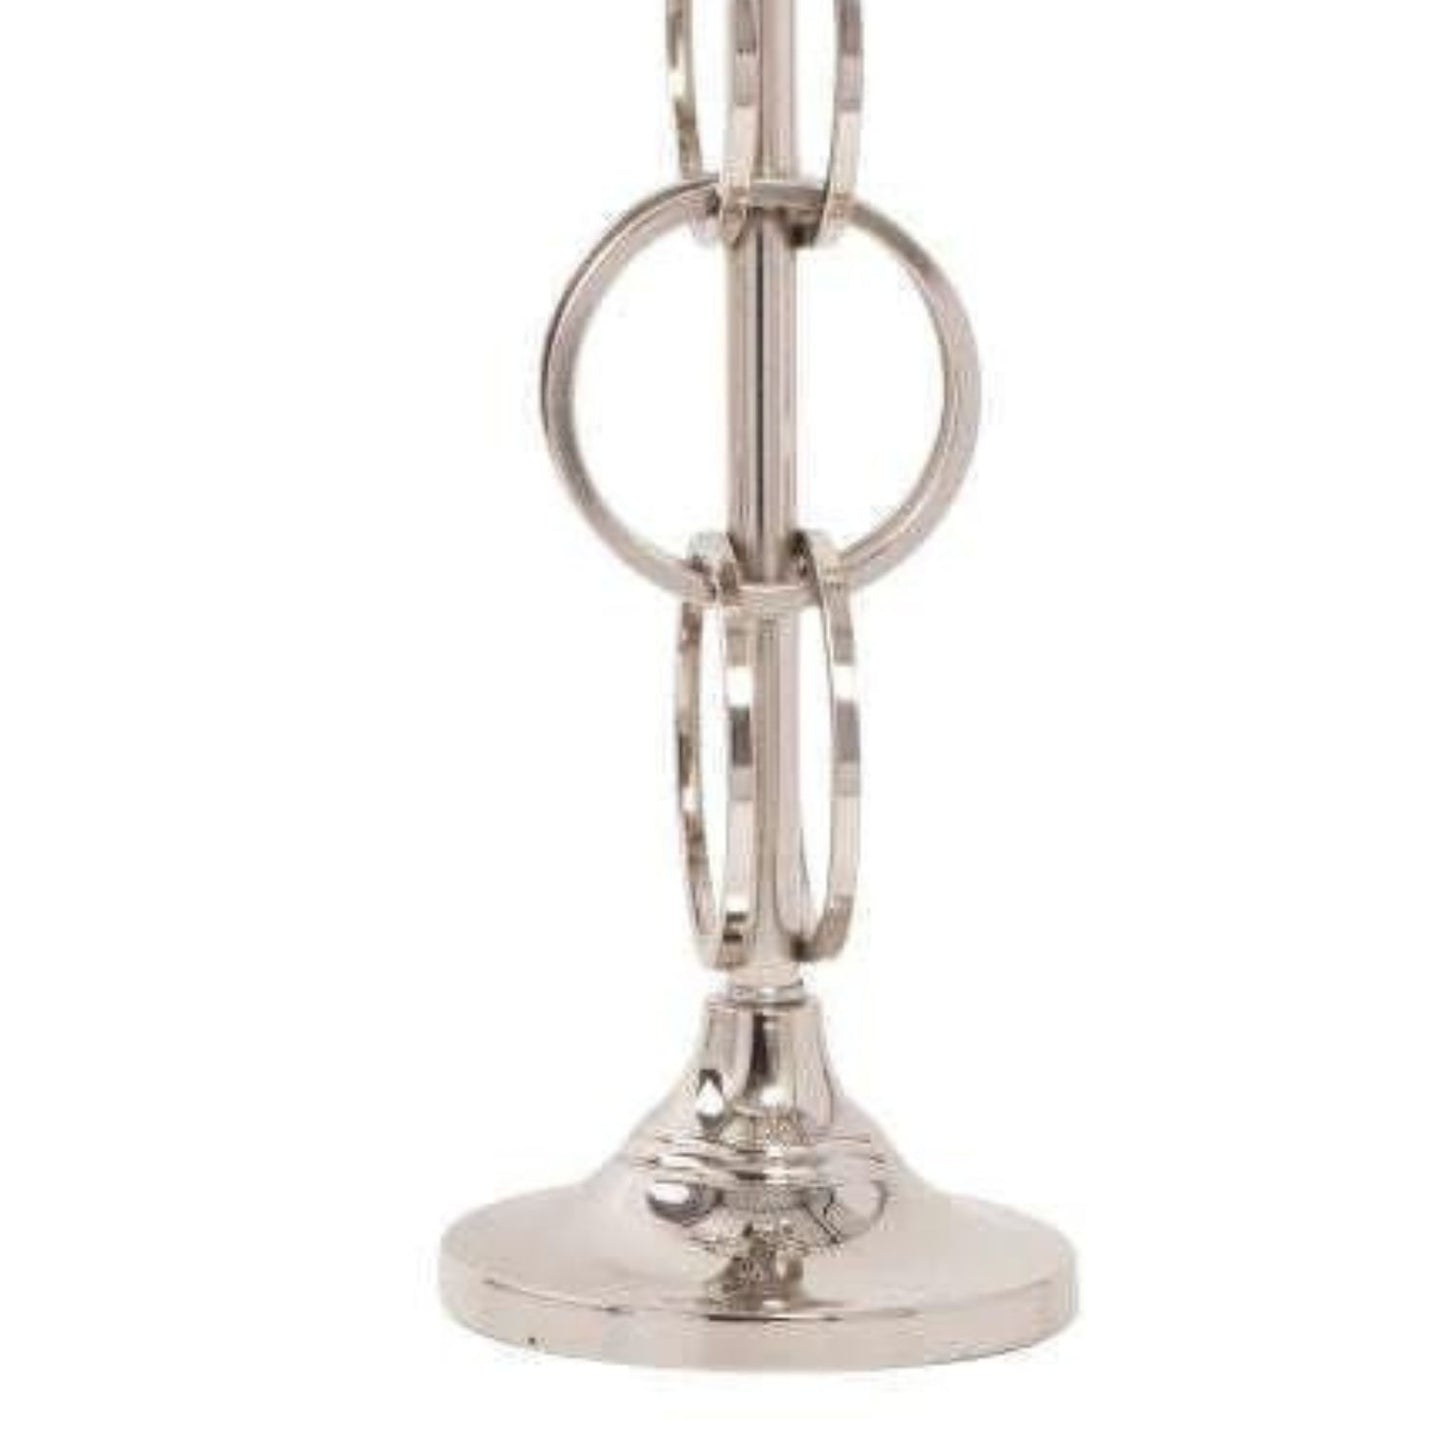 Silver candle holder with loop style design